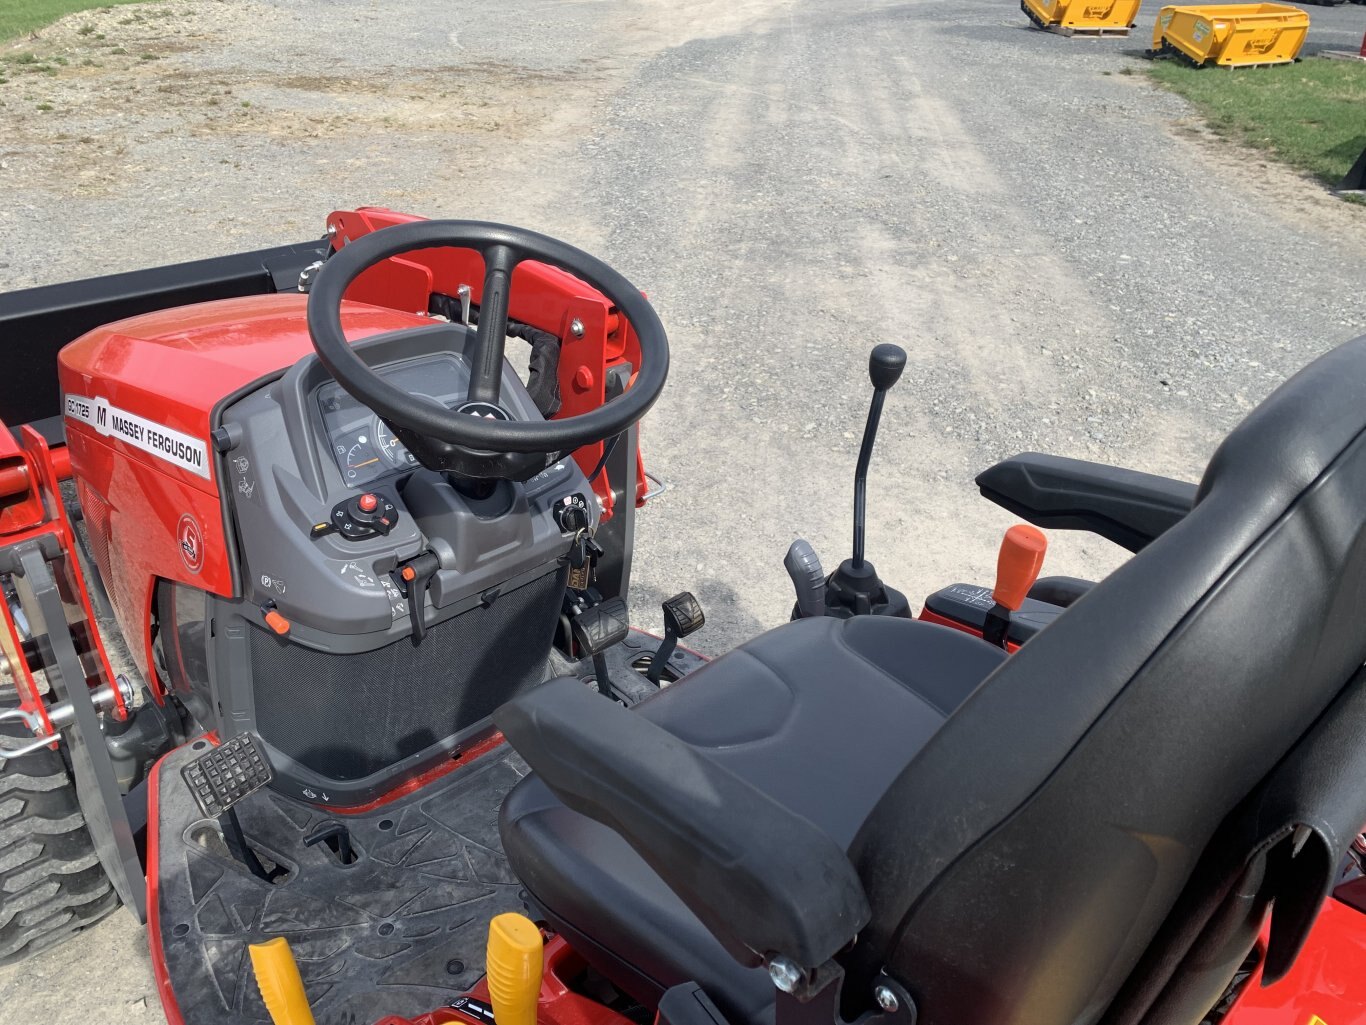 Massey Ferguson GC1725M Premium Sub Compact with Loader on Industrial Tires